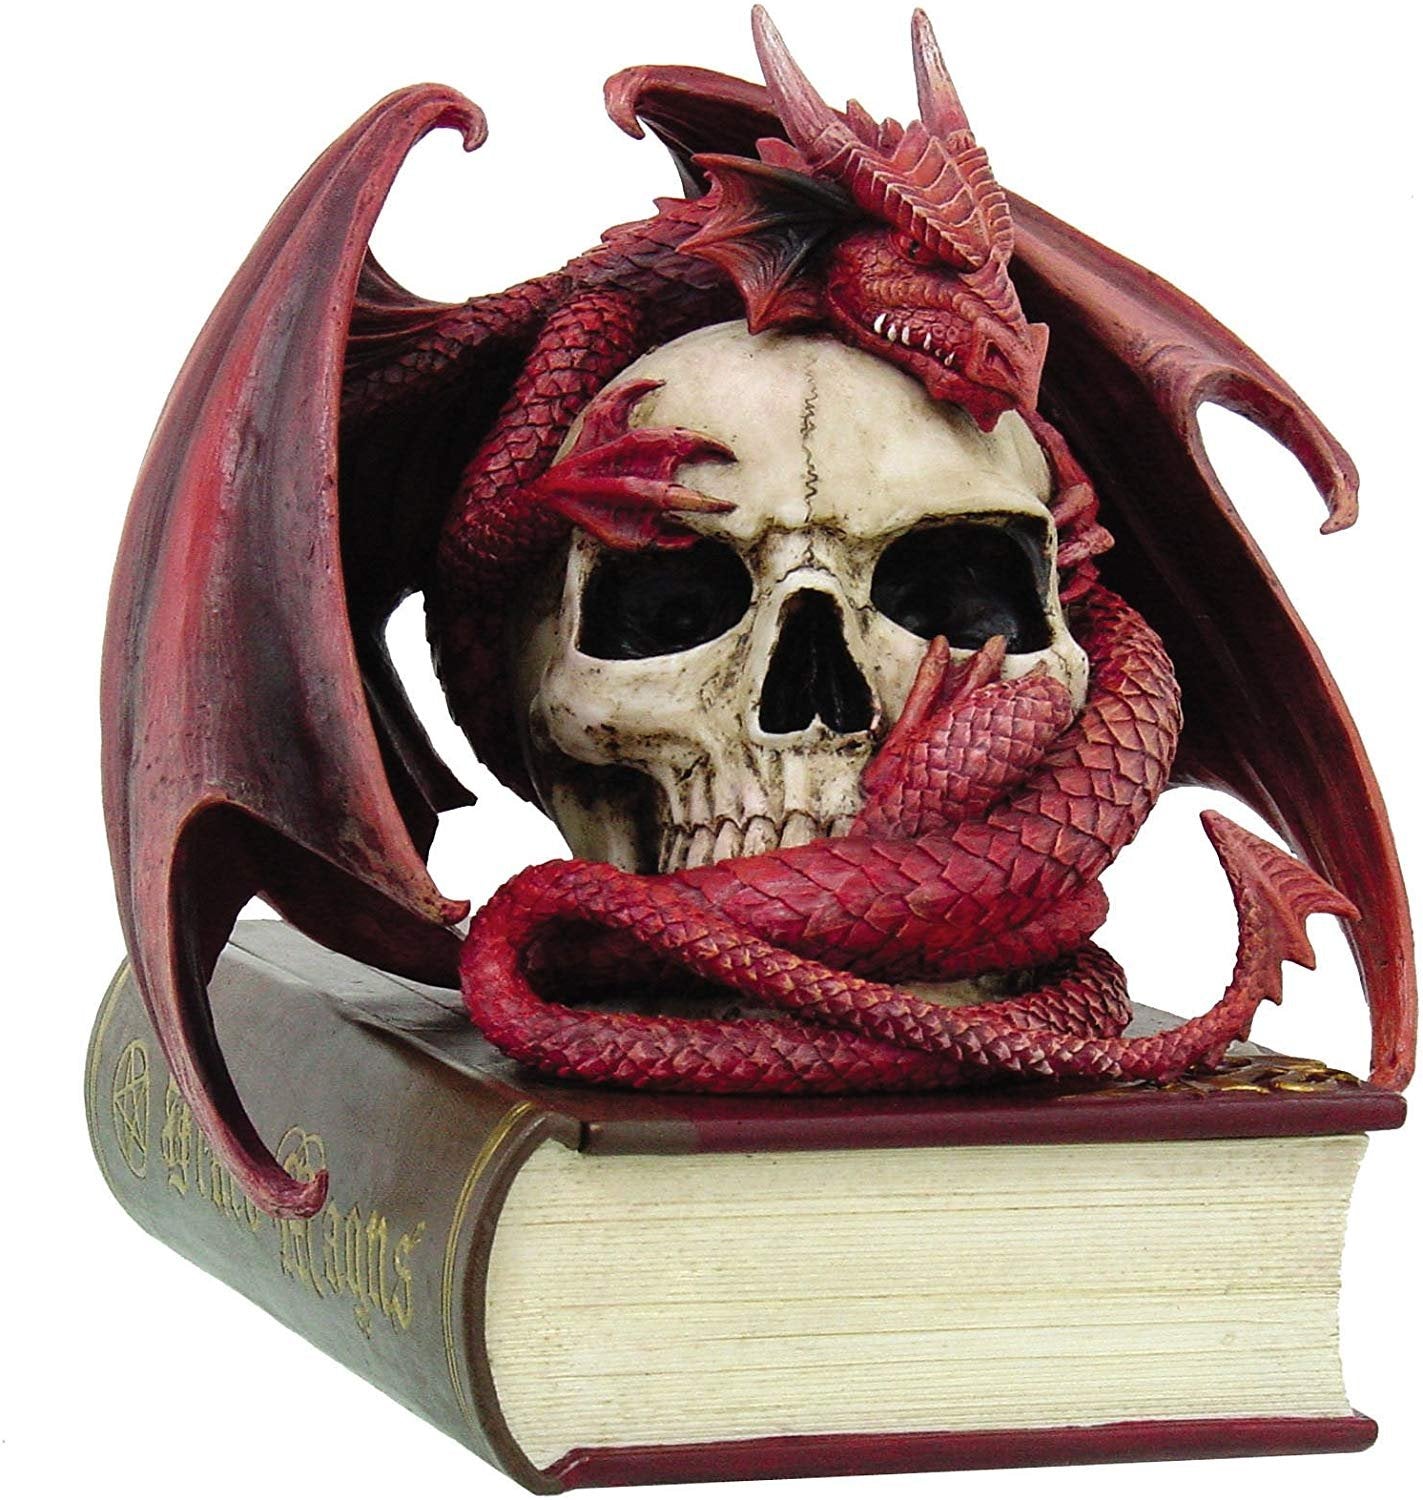 Pacific Giftware Anne Stokes Collection Red Blood Dragon Contemplation Skull Sculptural Trinket Box 8.5H